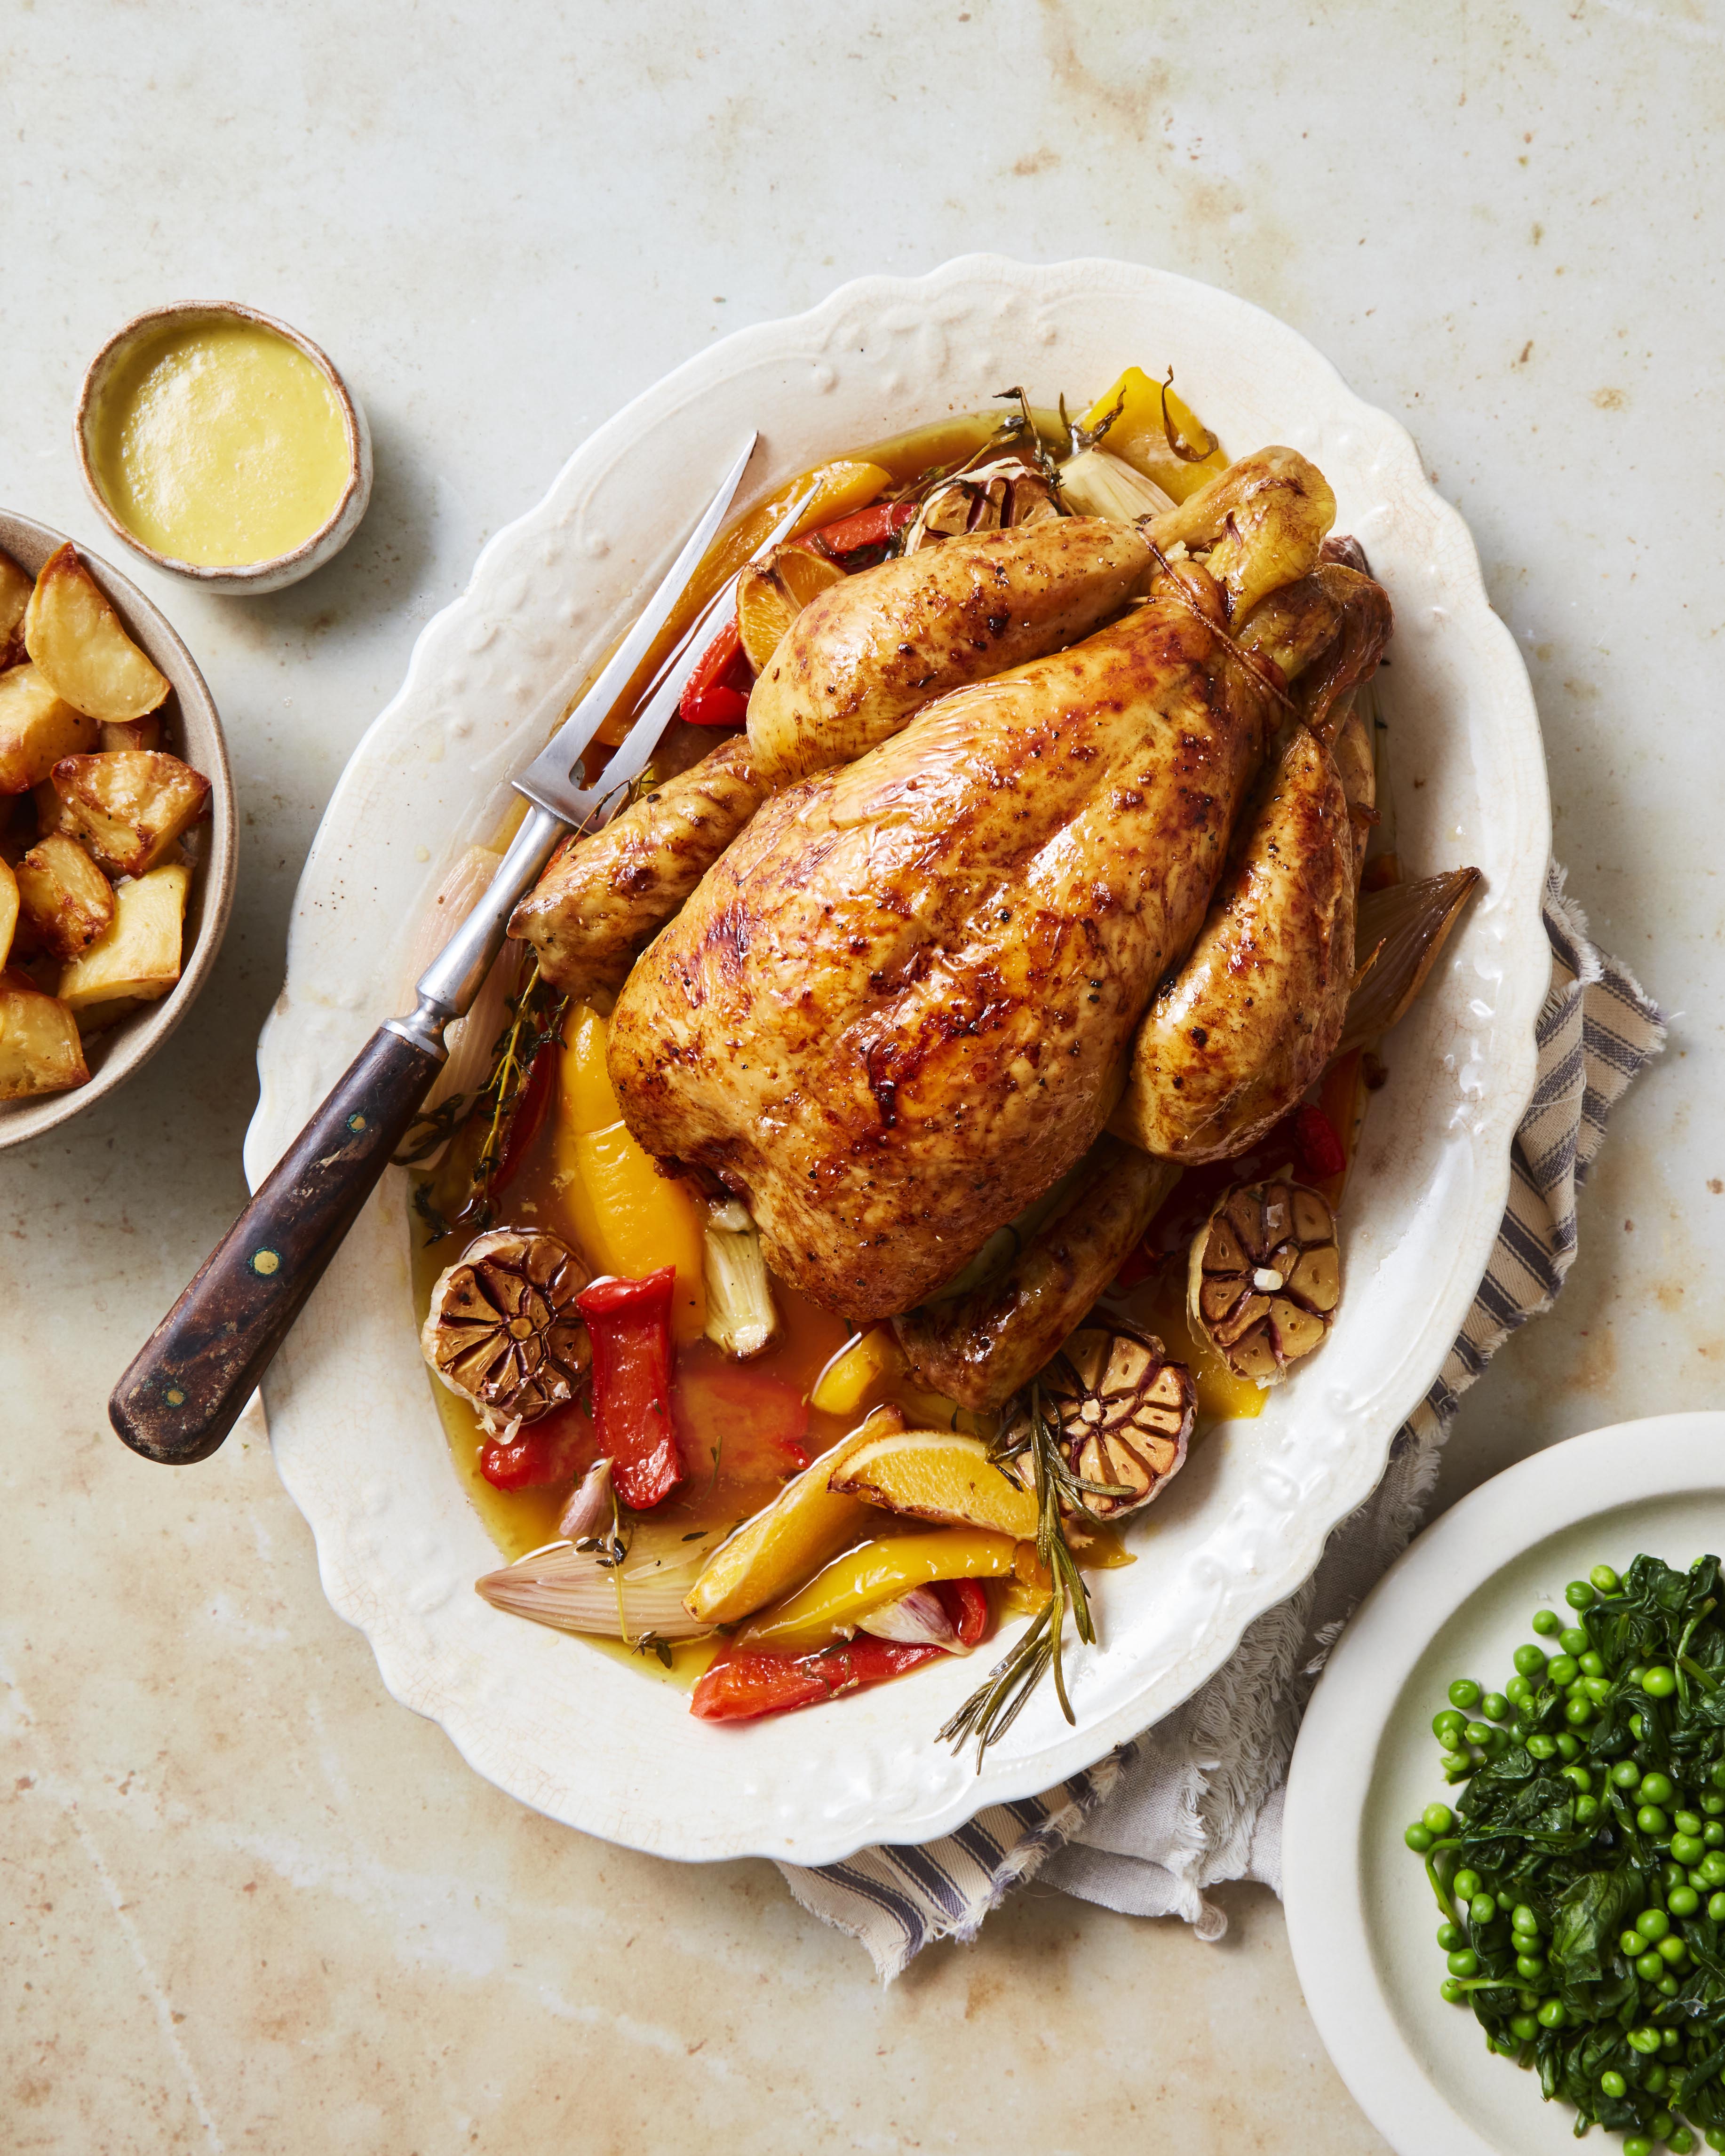 Slow Roasted Chicken with Apple Cyder Vinegar | Recipes | Aspall